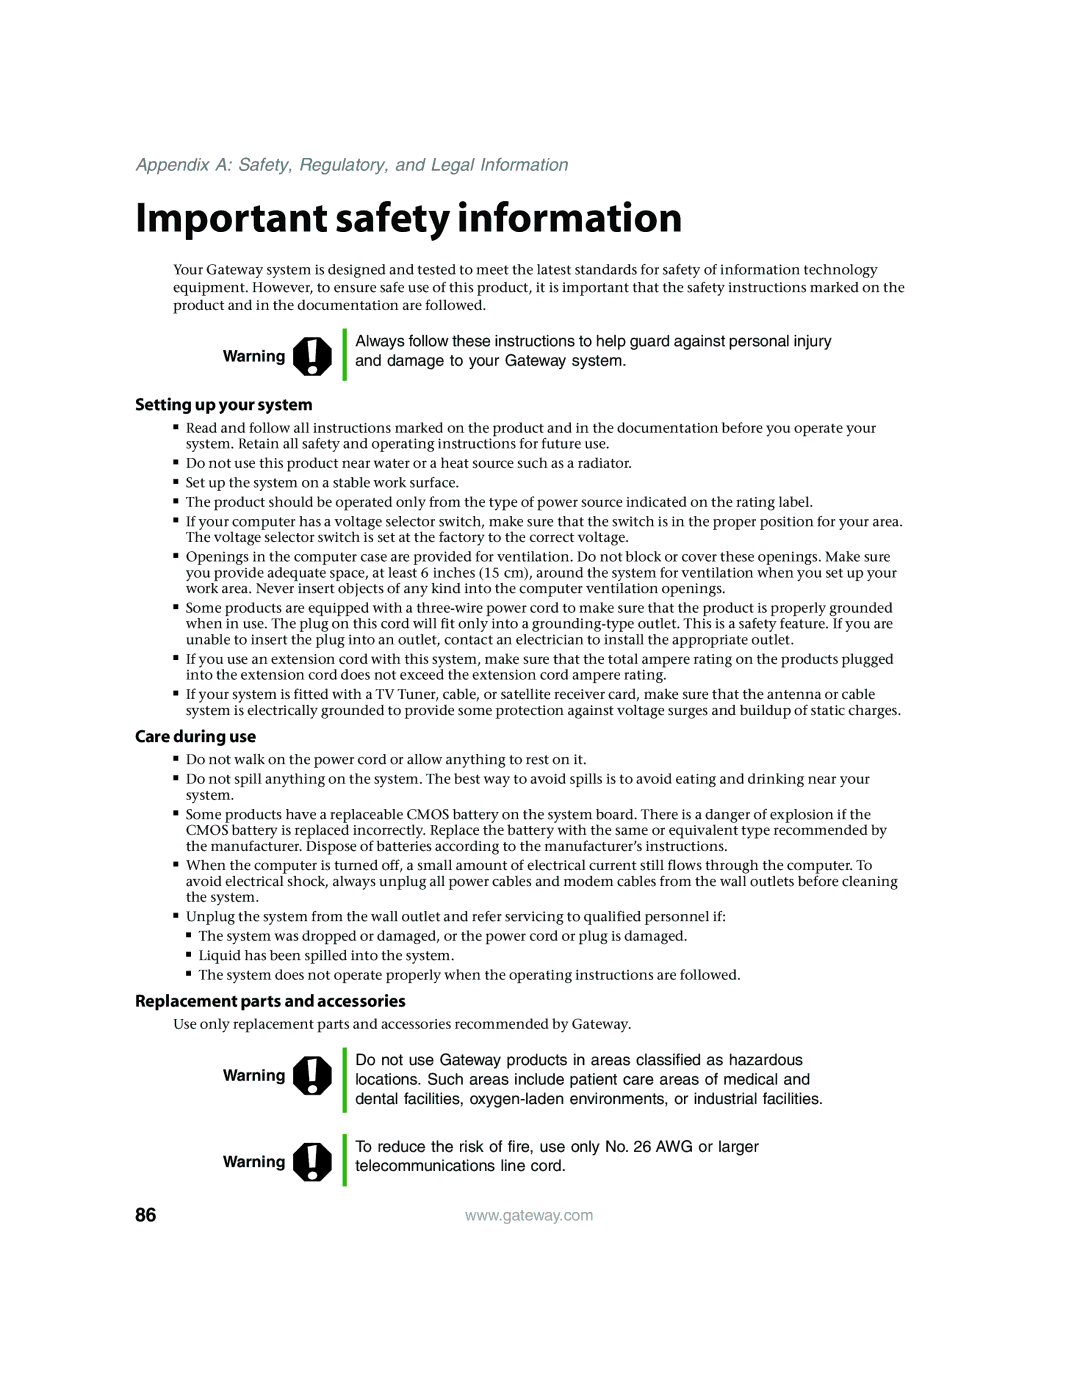 Gateway E4350 manual Important safety information, Setting up your system 